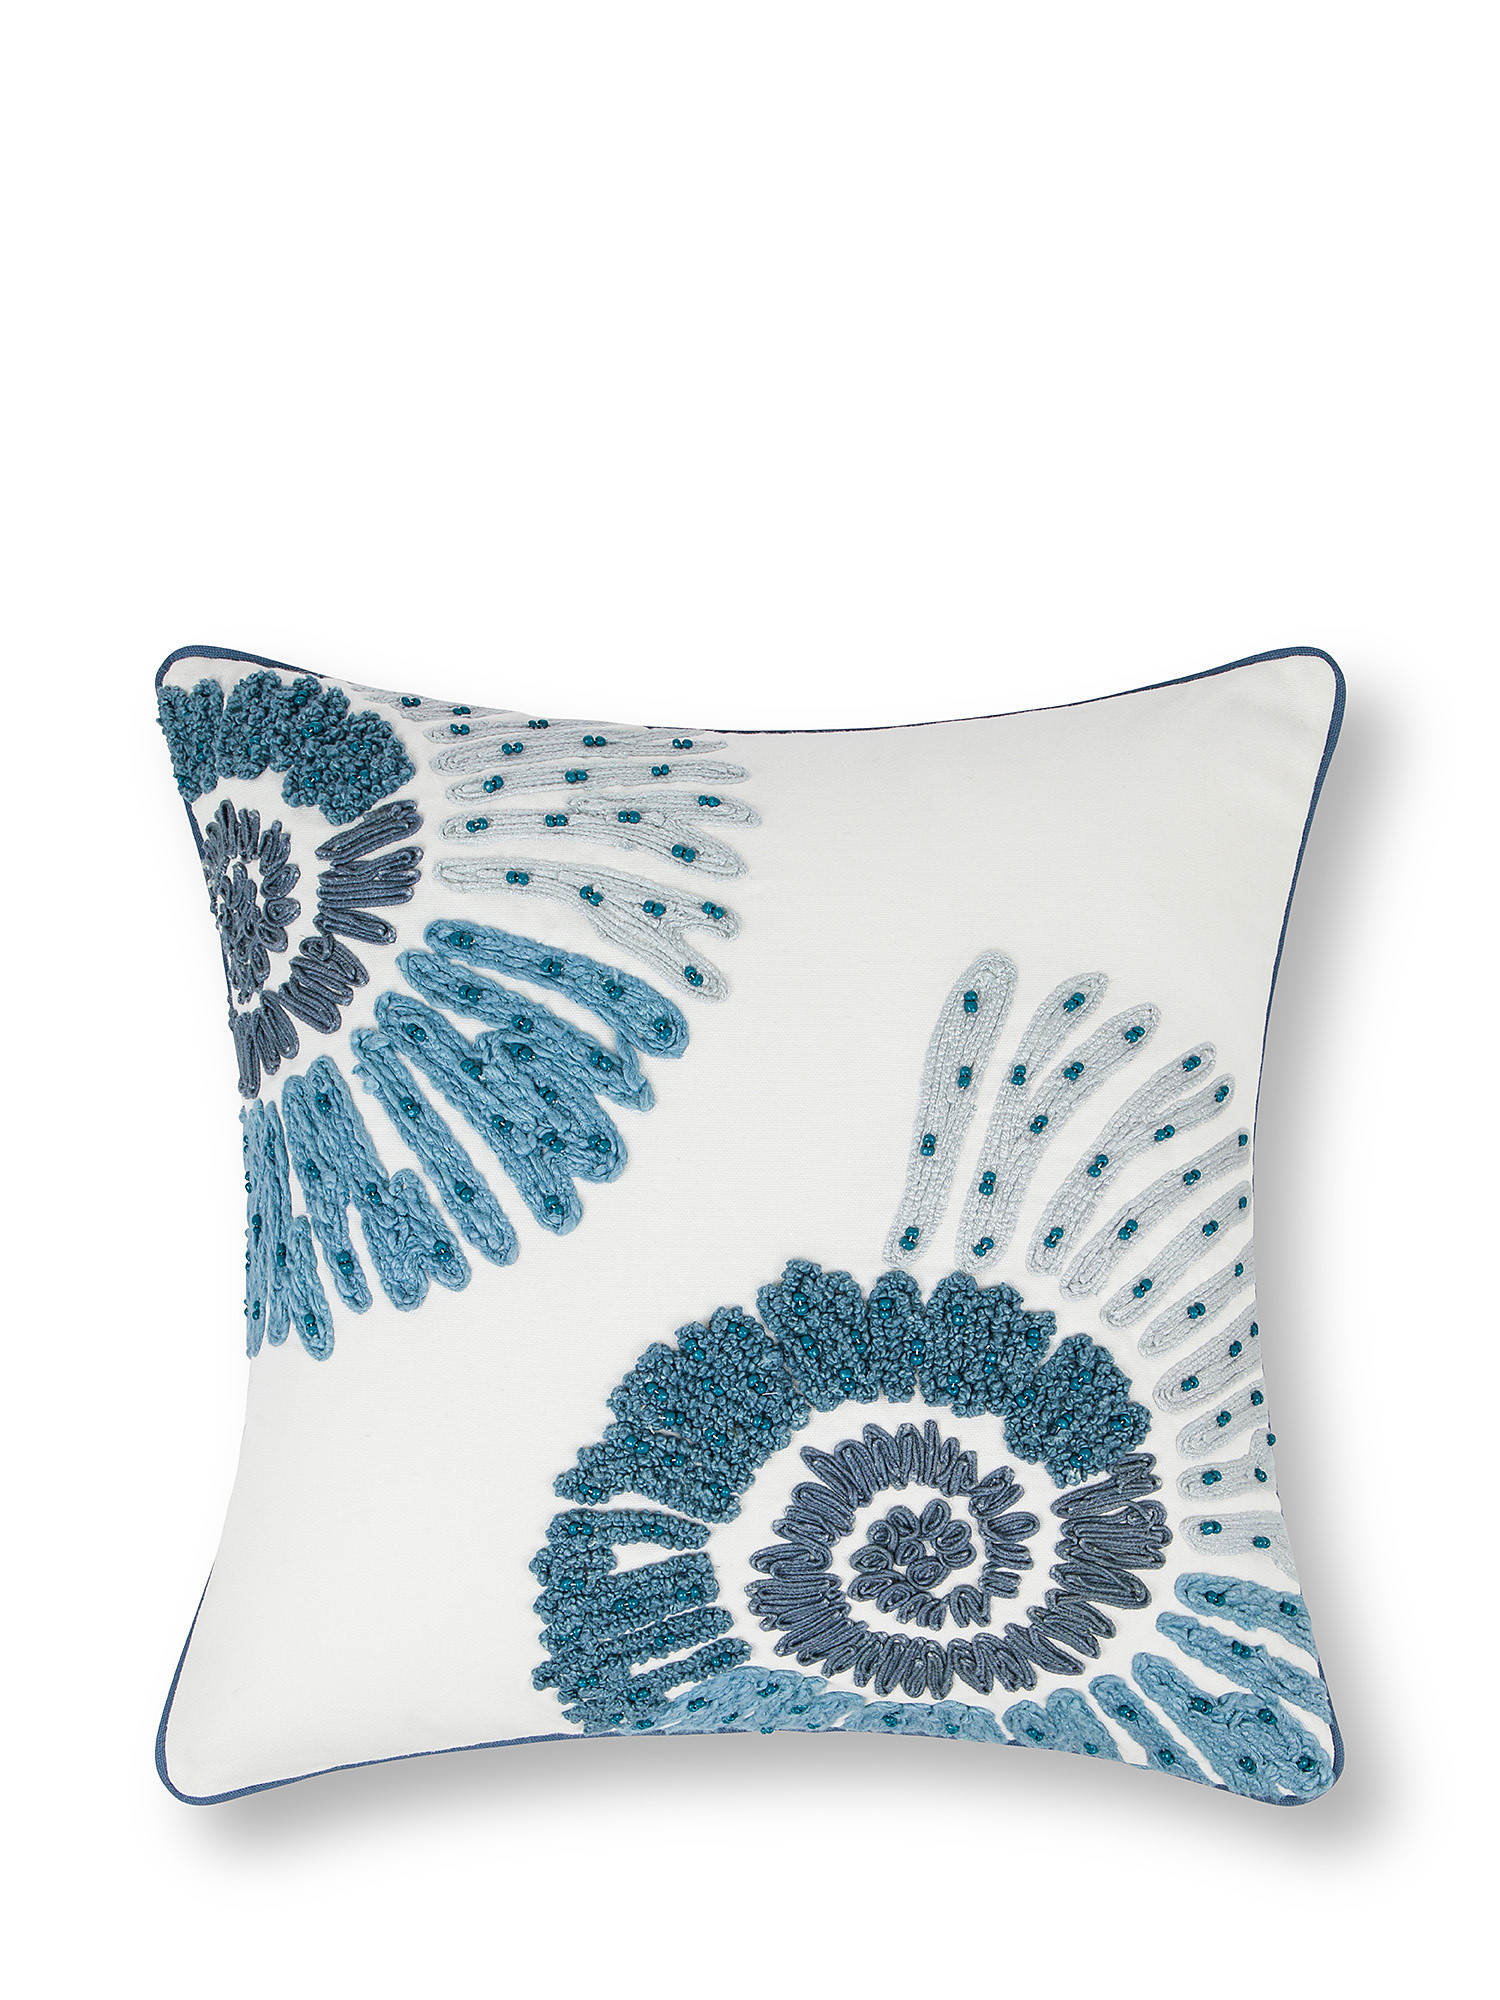 45x45 cm cushion with applications and embroidery, Blue, large image number 0